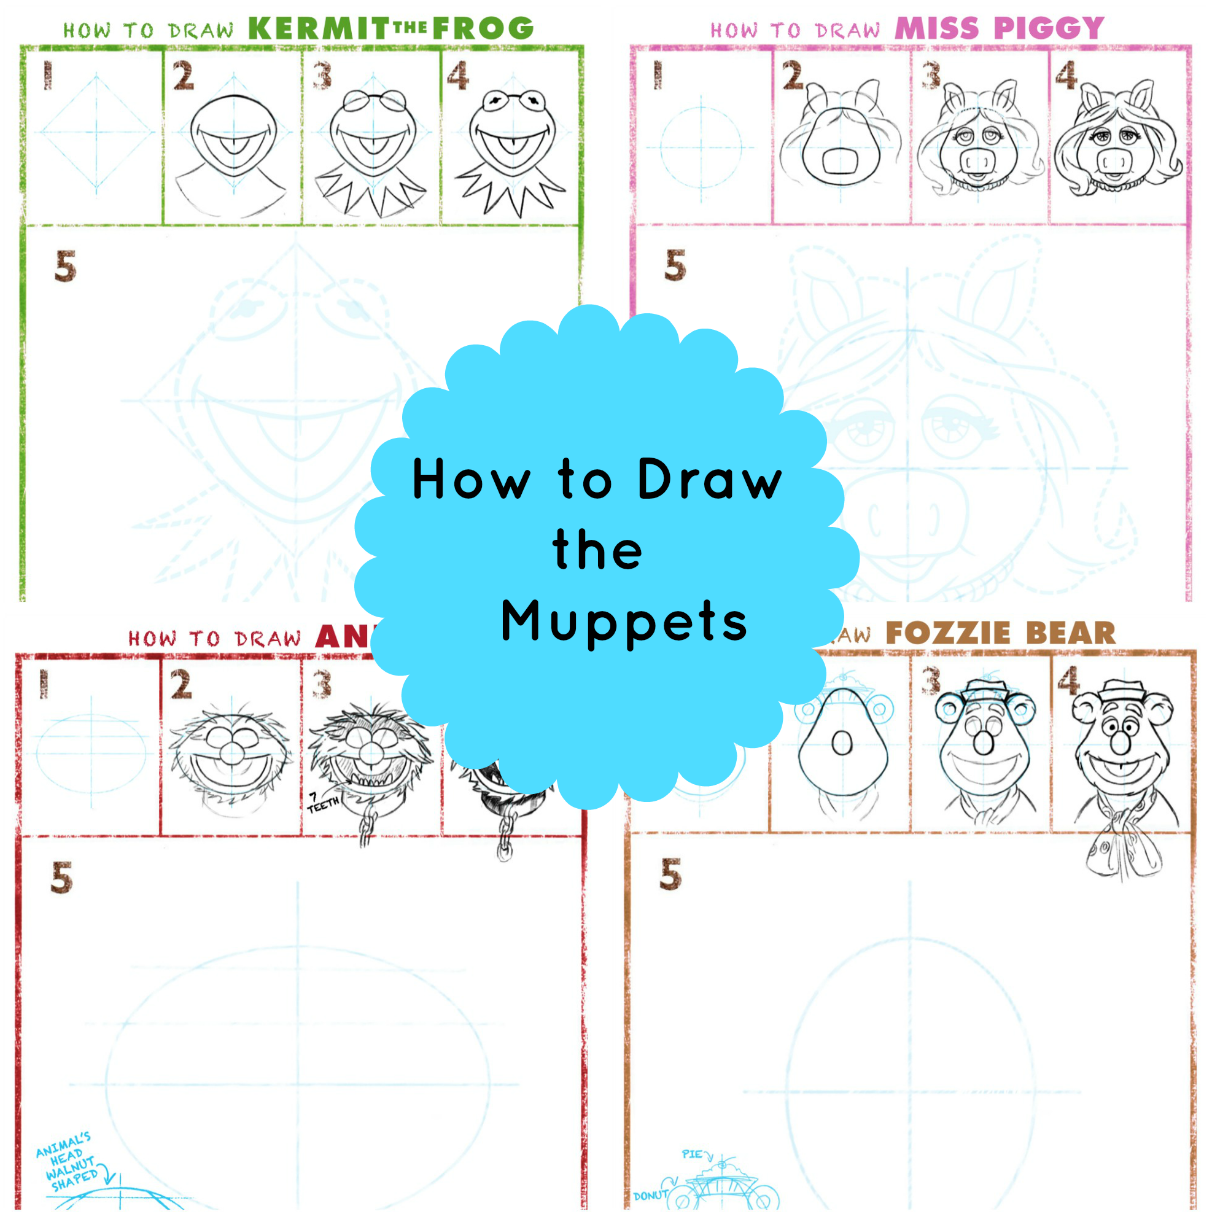 How to Draw the MUPPETS: Kermit, Miss Piggy, Animal, Fozzie Bear and